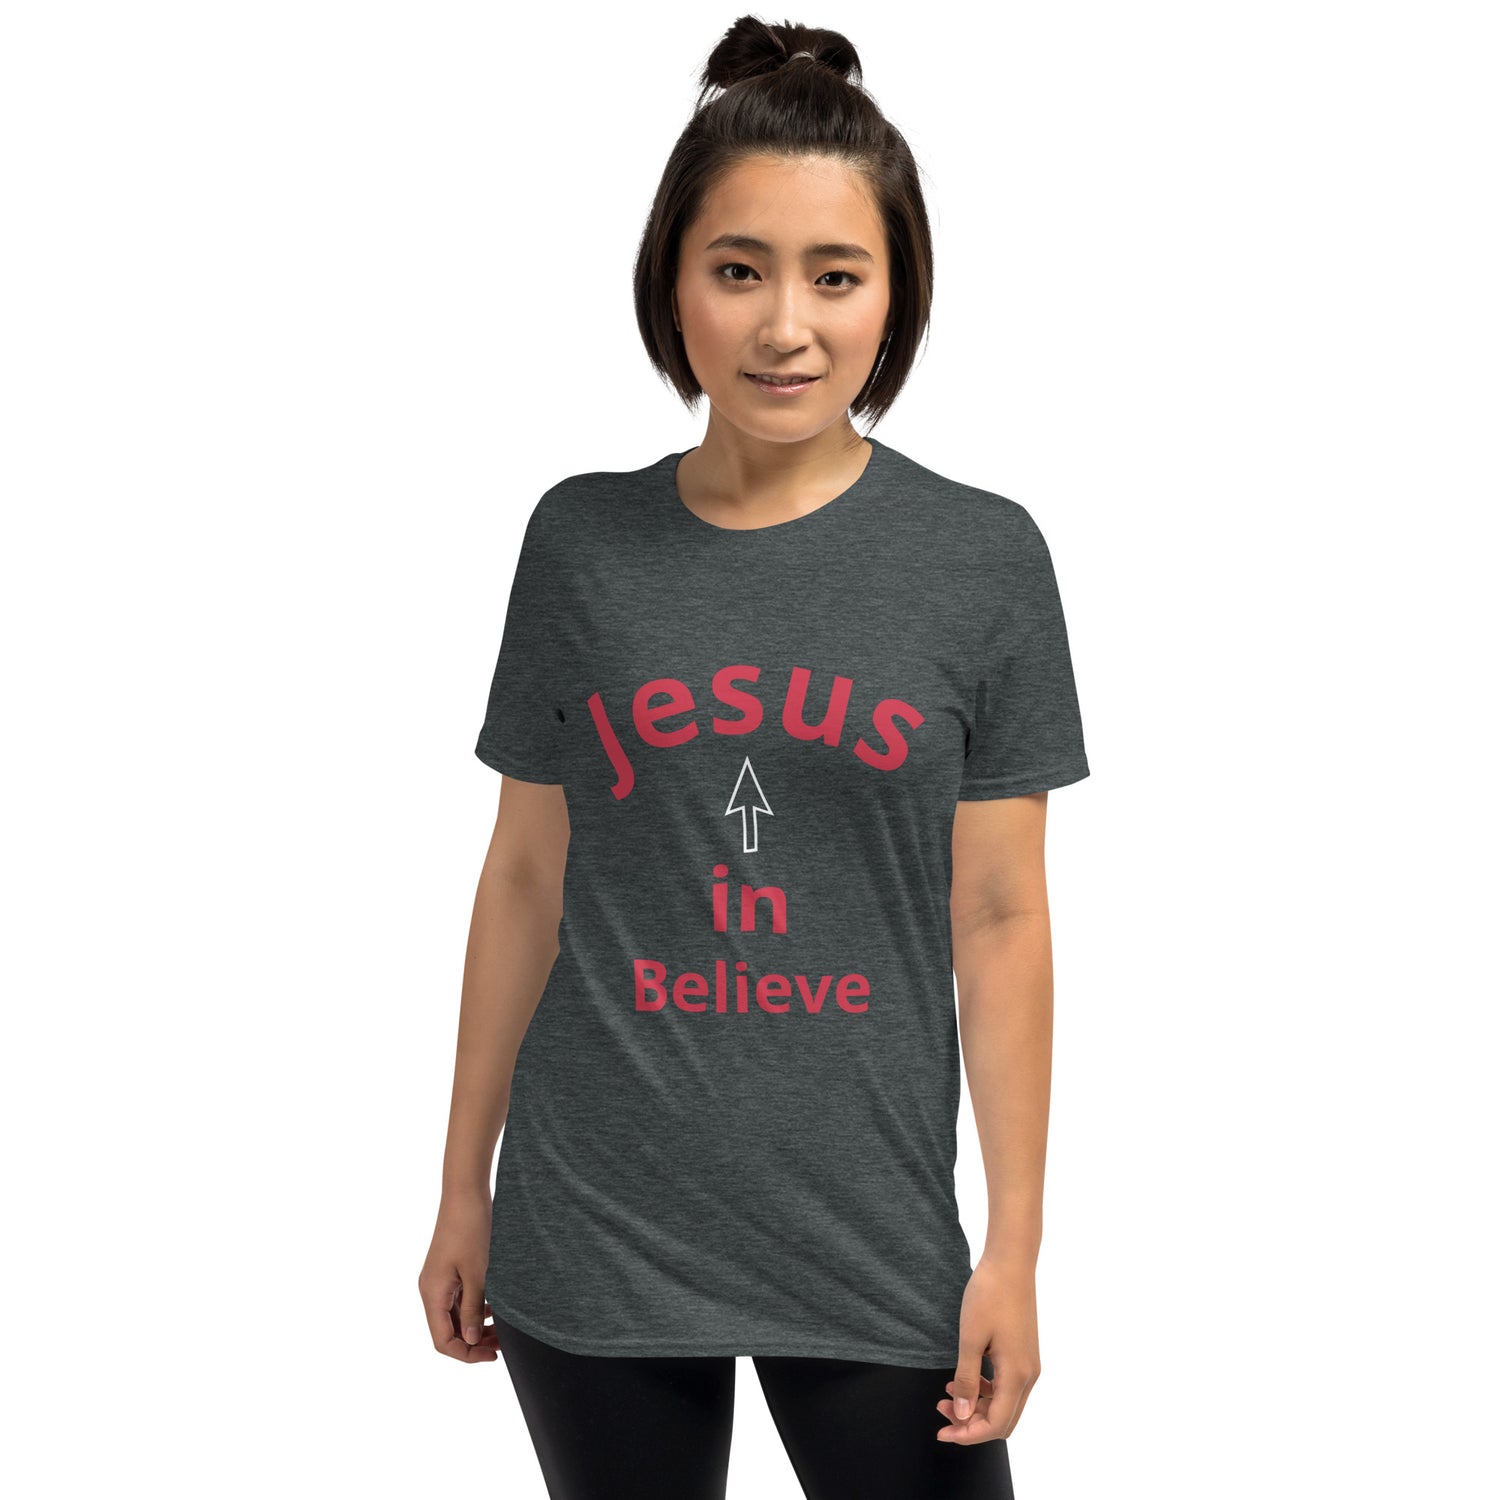 Unisex soft-style dark heather T-shirt with Believe in Jesus in Red letters with a White arrow 